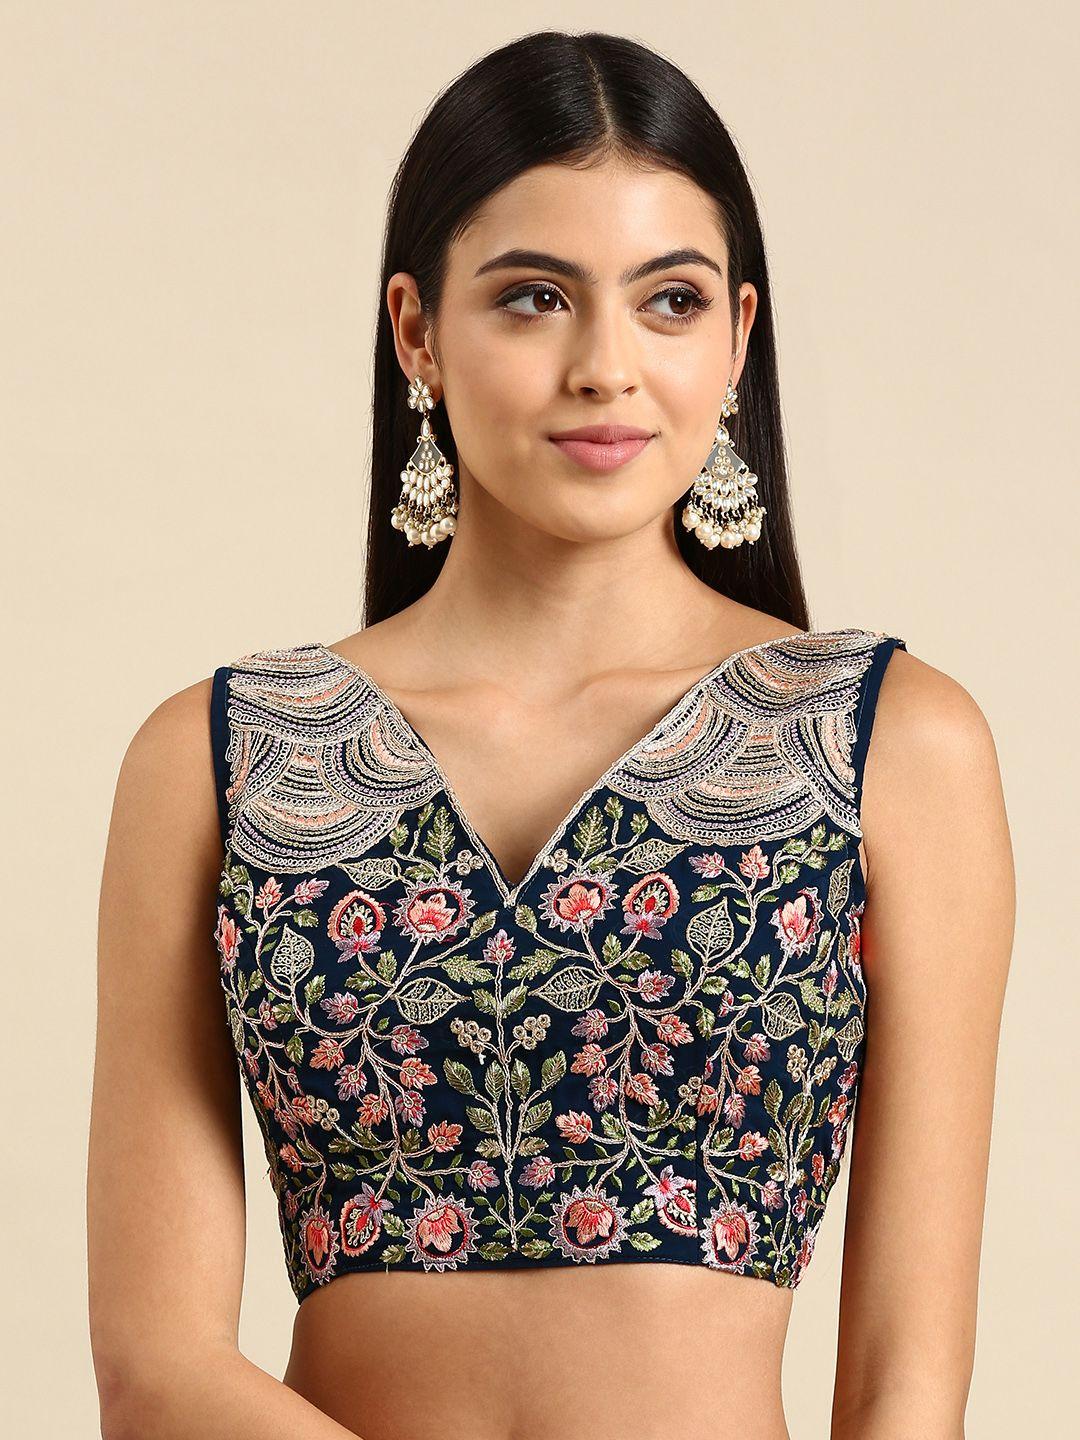 flaher women embroidered georgette ready to wear padded saree blouse